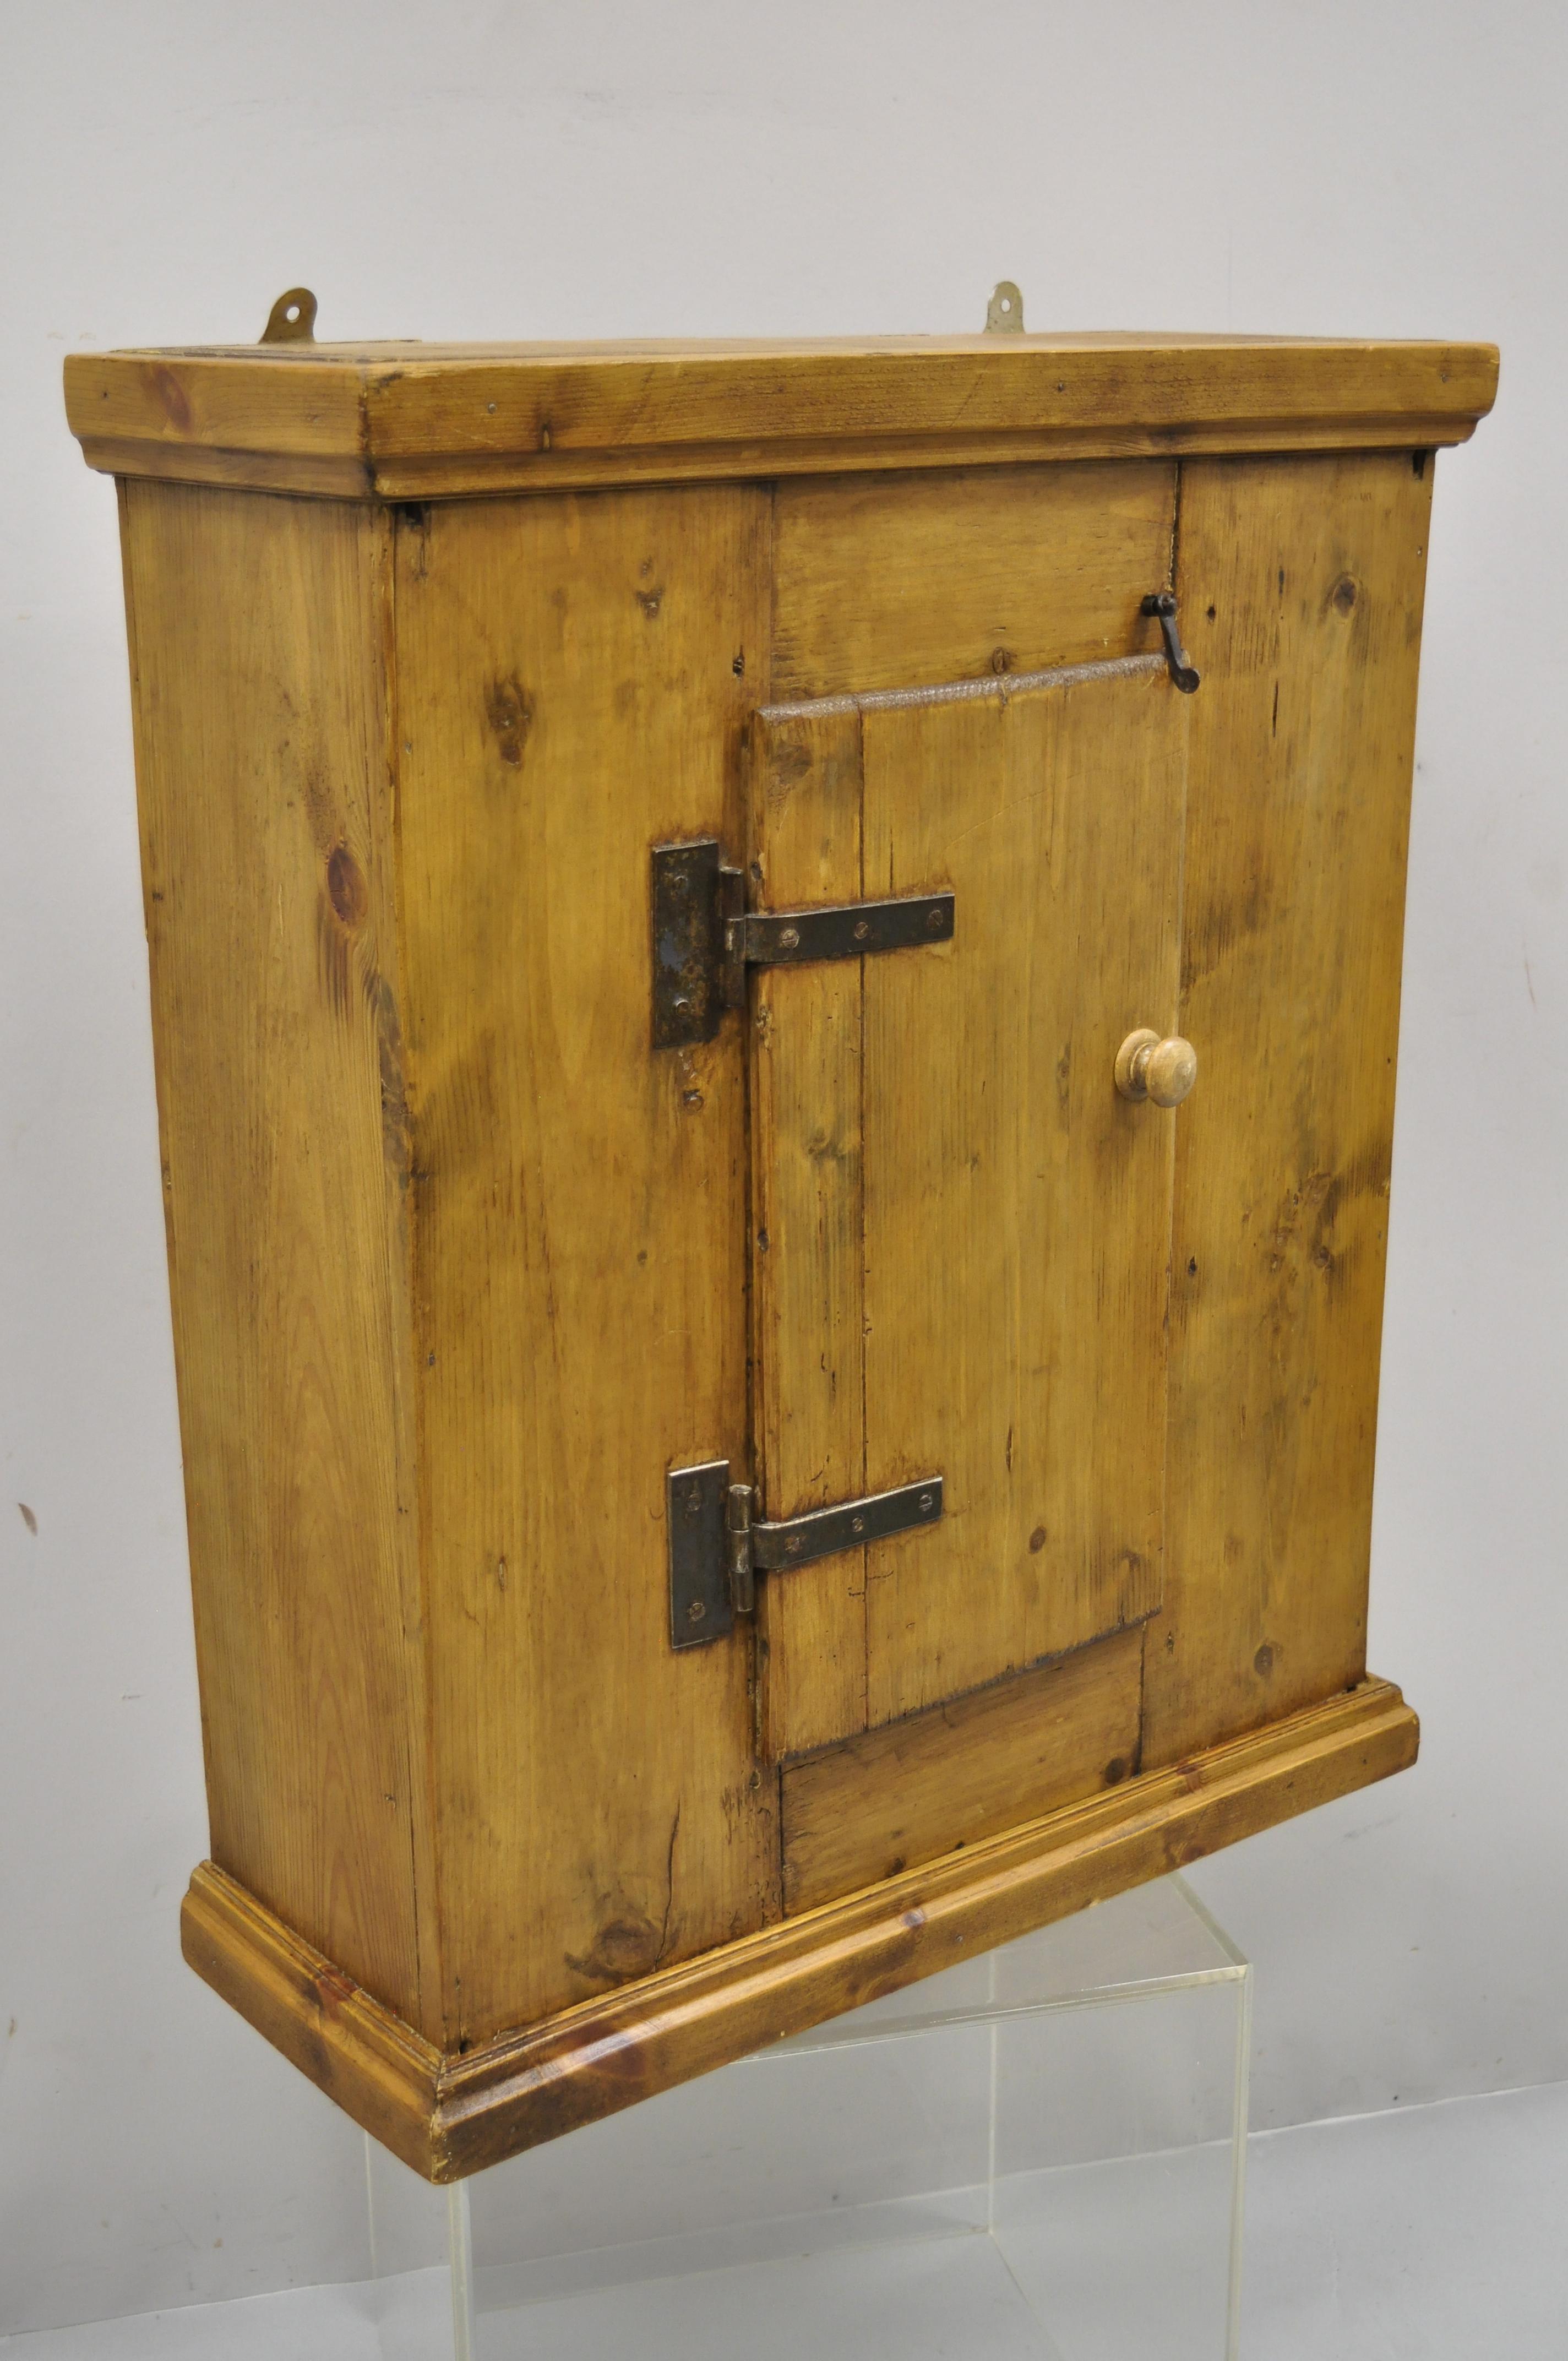 Antique French Provincial style one door reclaimed wood wall cabinet cupboard pantry. Item is constructed with antique reclaimed wood, cast iron hinges, distressed finish, 1 swing door, 1 wooden shelf, very nice item, quality craftsmanship, great